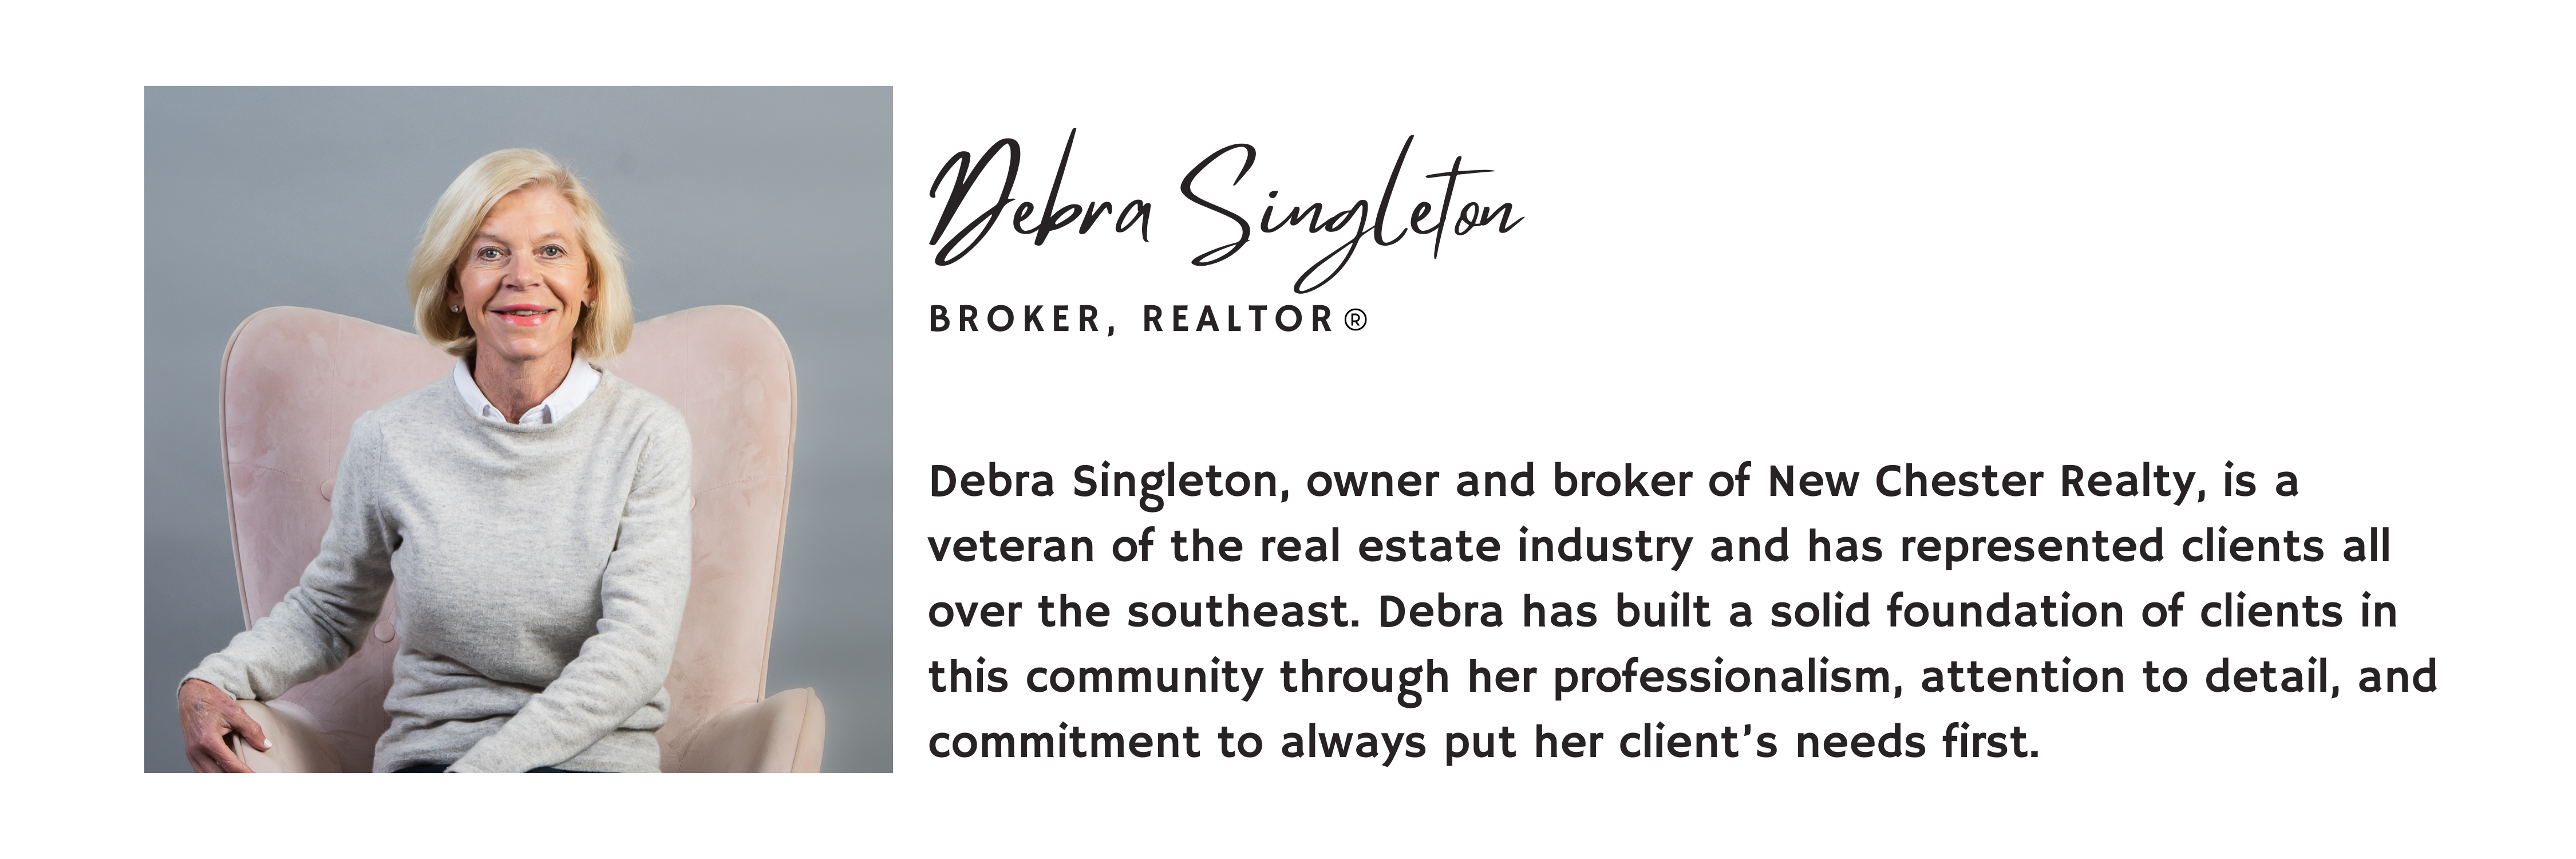 Debra Singleton, owner and broker of New Chester Realty, is a veteran of the real estate industry and has represented clients all over the southeast. Debra has built a solid foundation of clients in this community through her professionalism, attention to detail, and commitment to always put her client’s needs first.